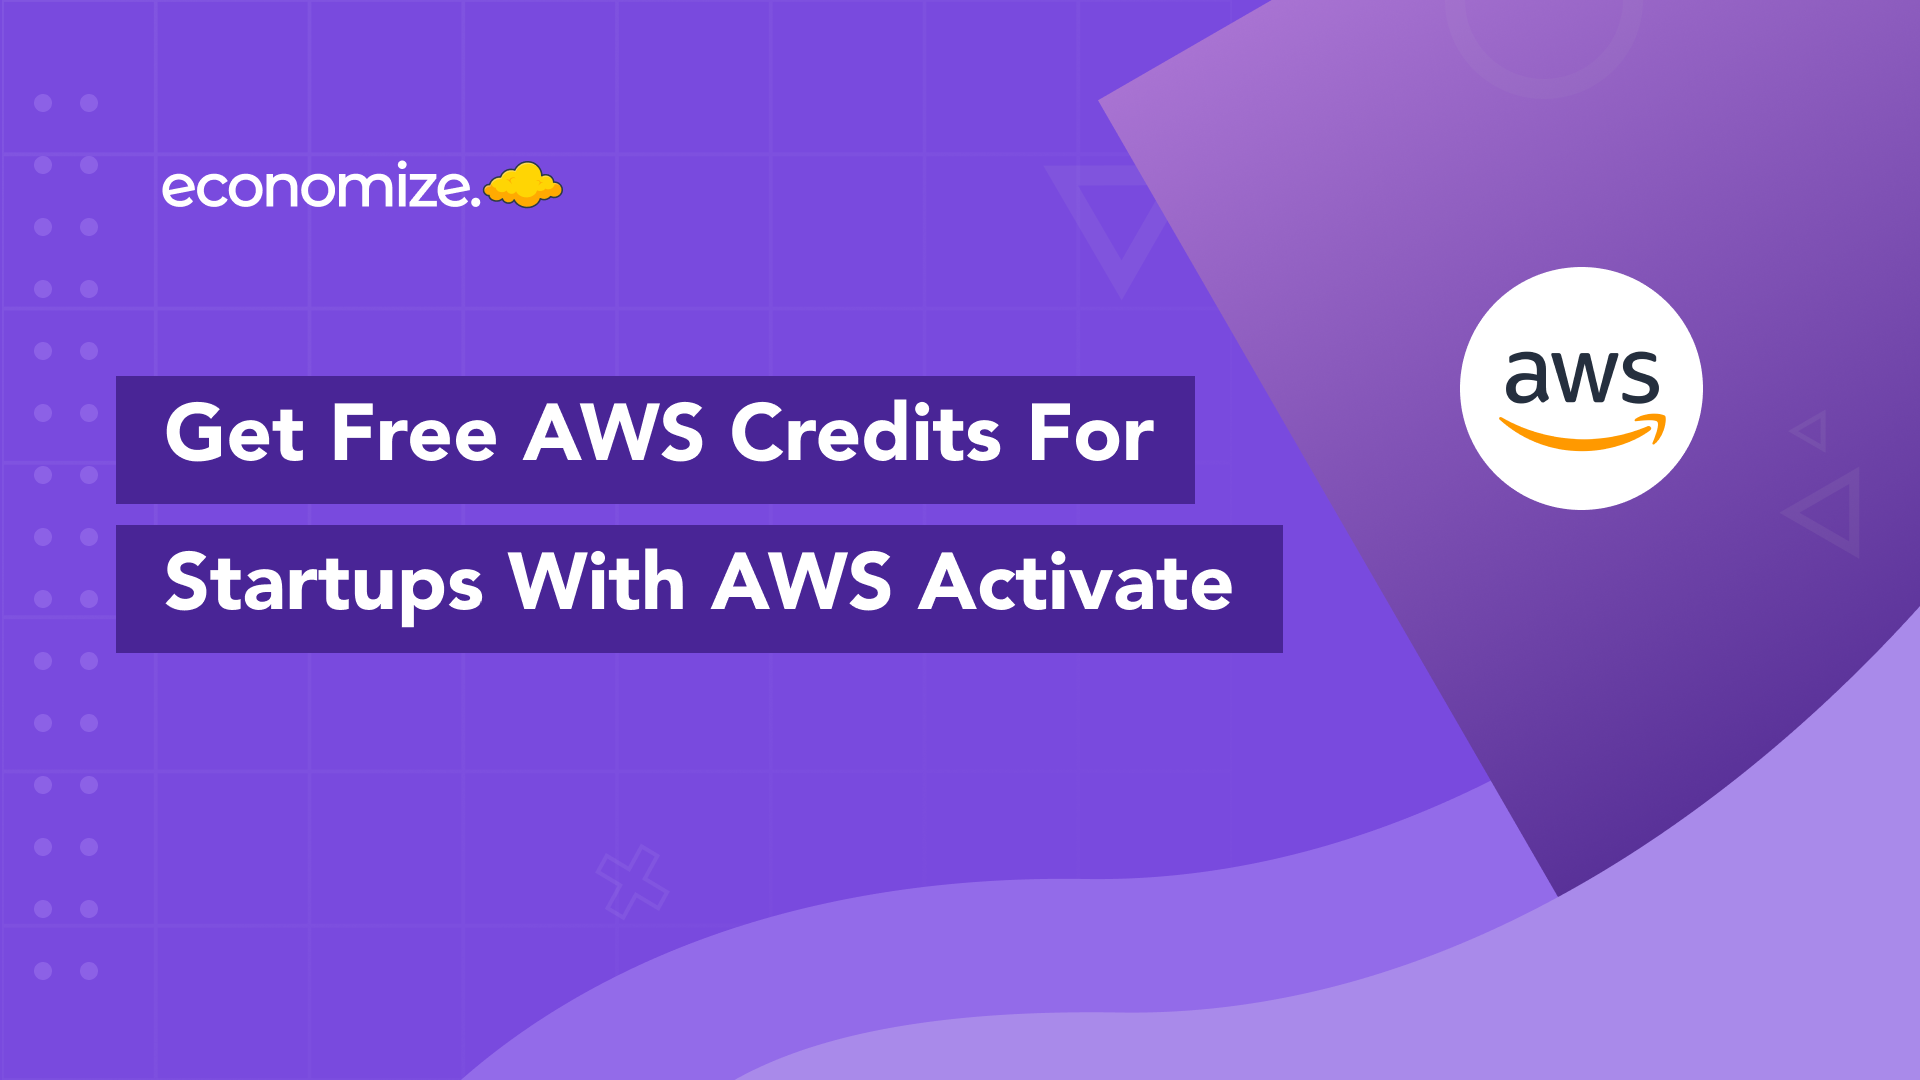 AWS Activate Optimize Your Costs And Get Free AWS Credits